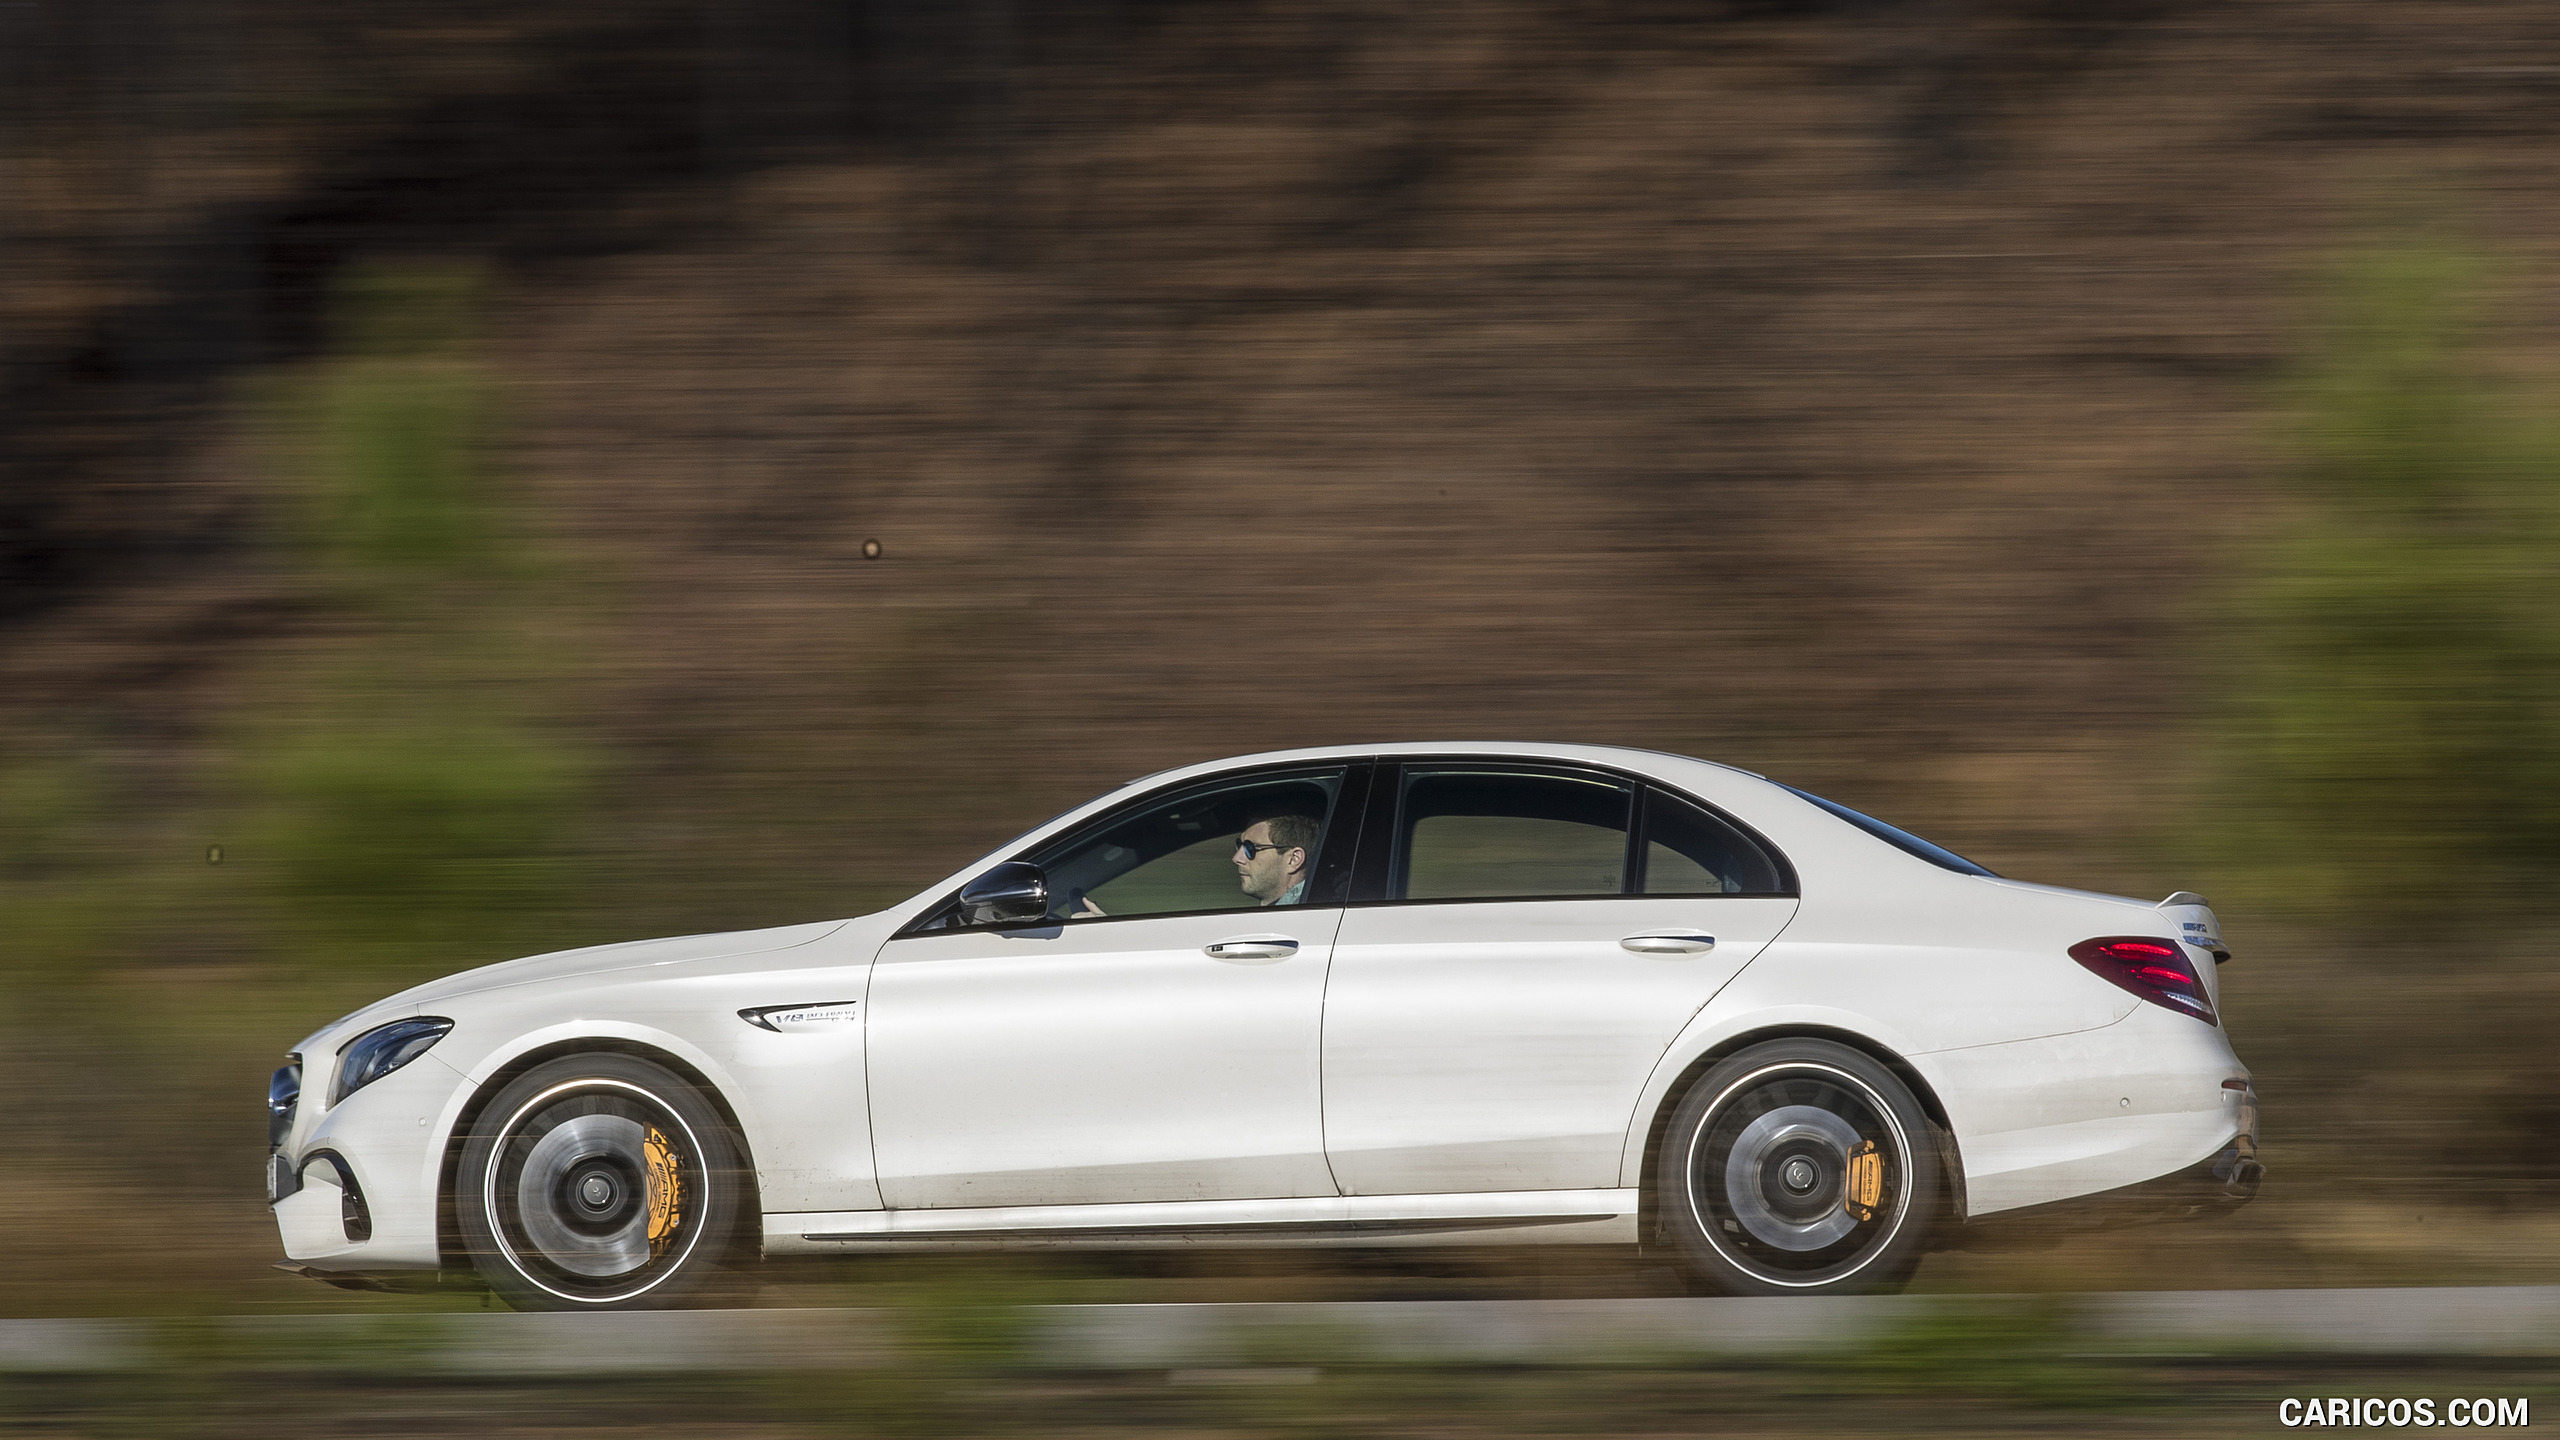 2018 Mercedes-AMG E63 S 4MATIC+ - Side, #123 of 323